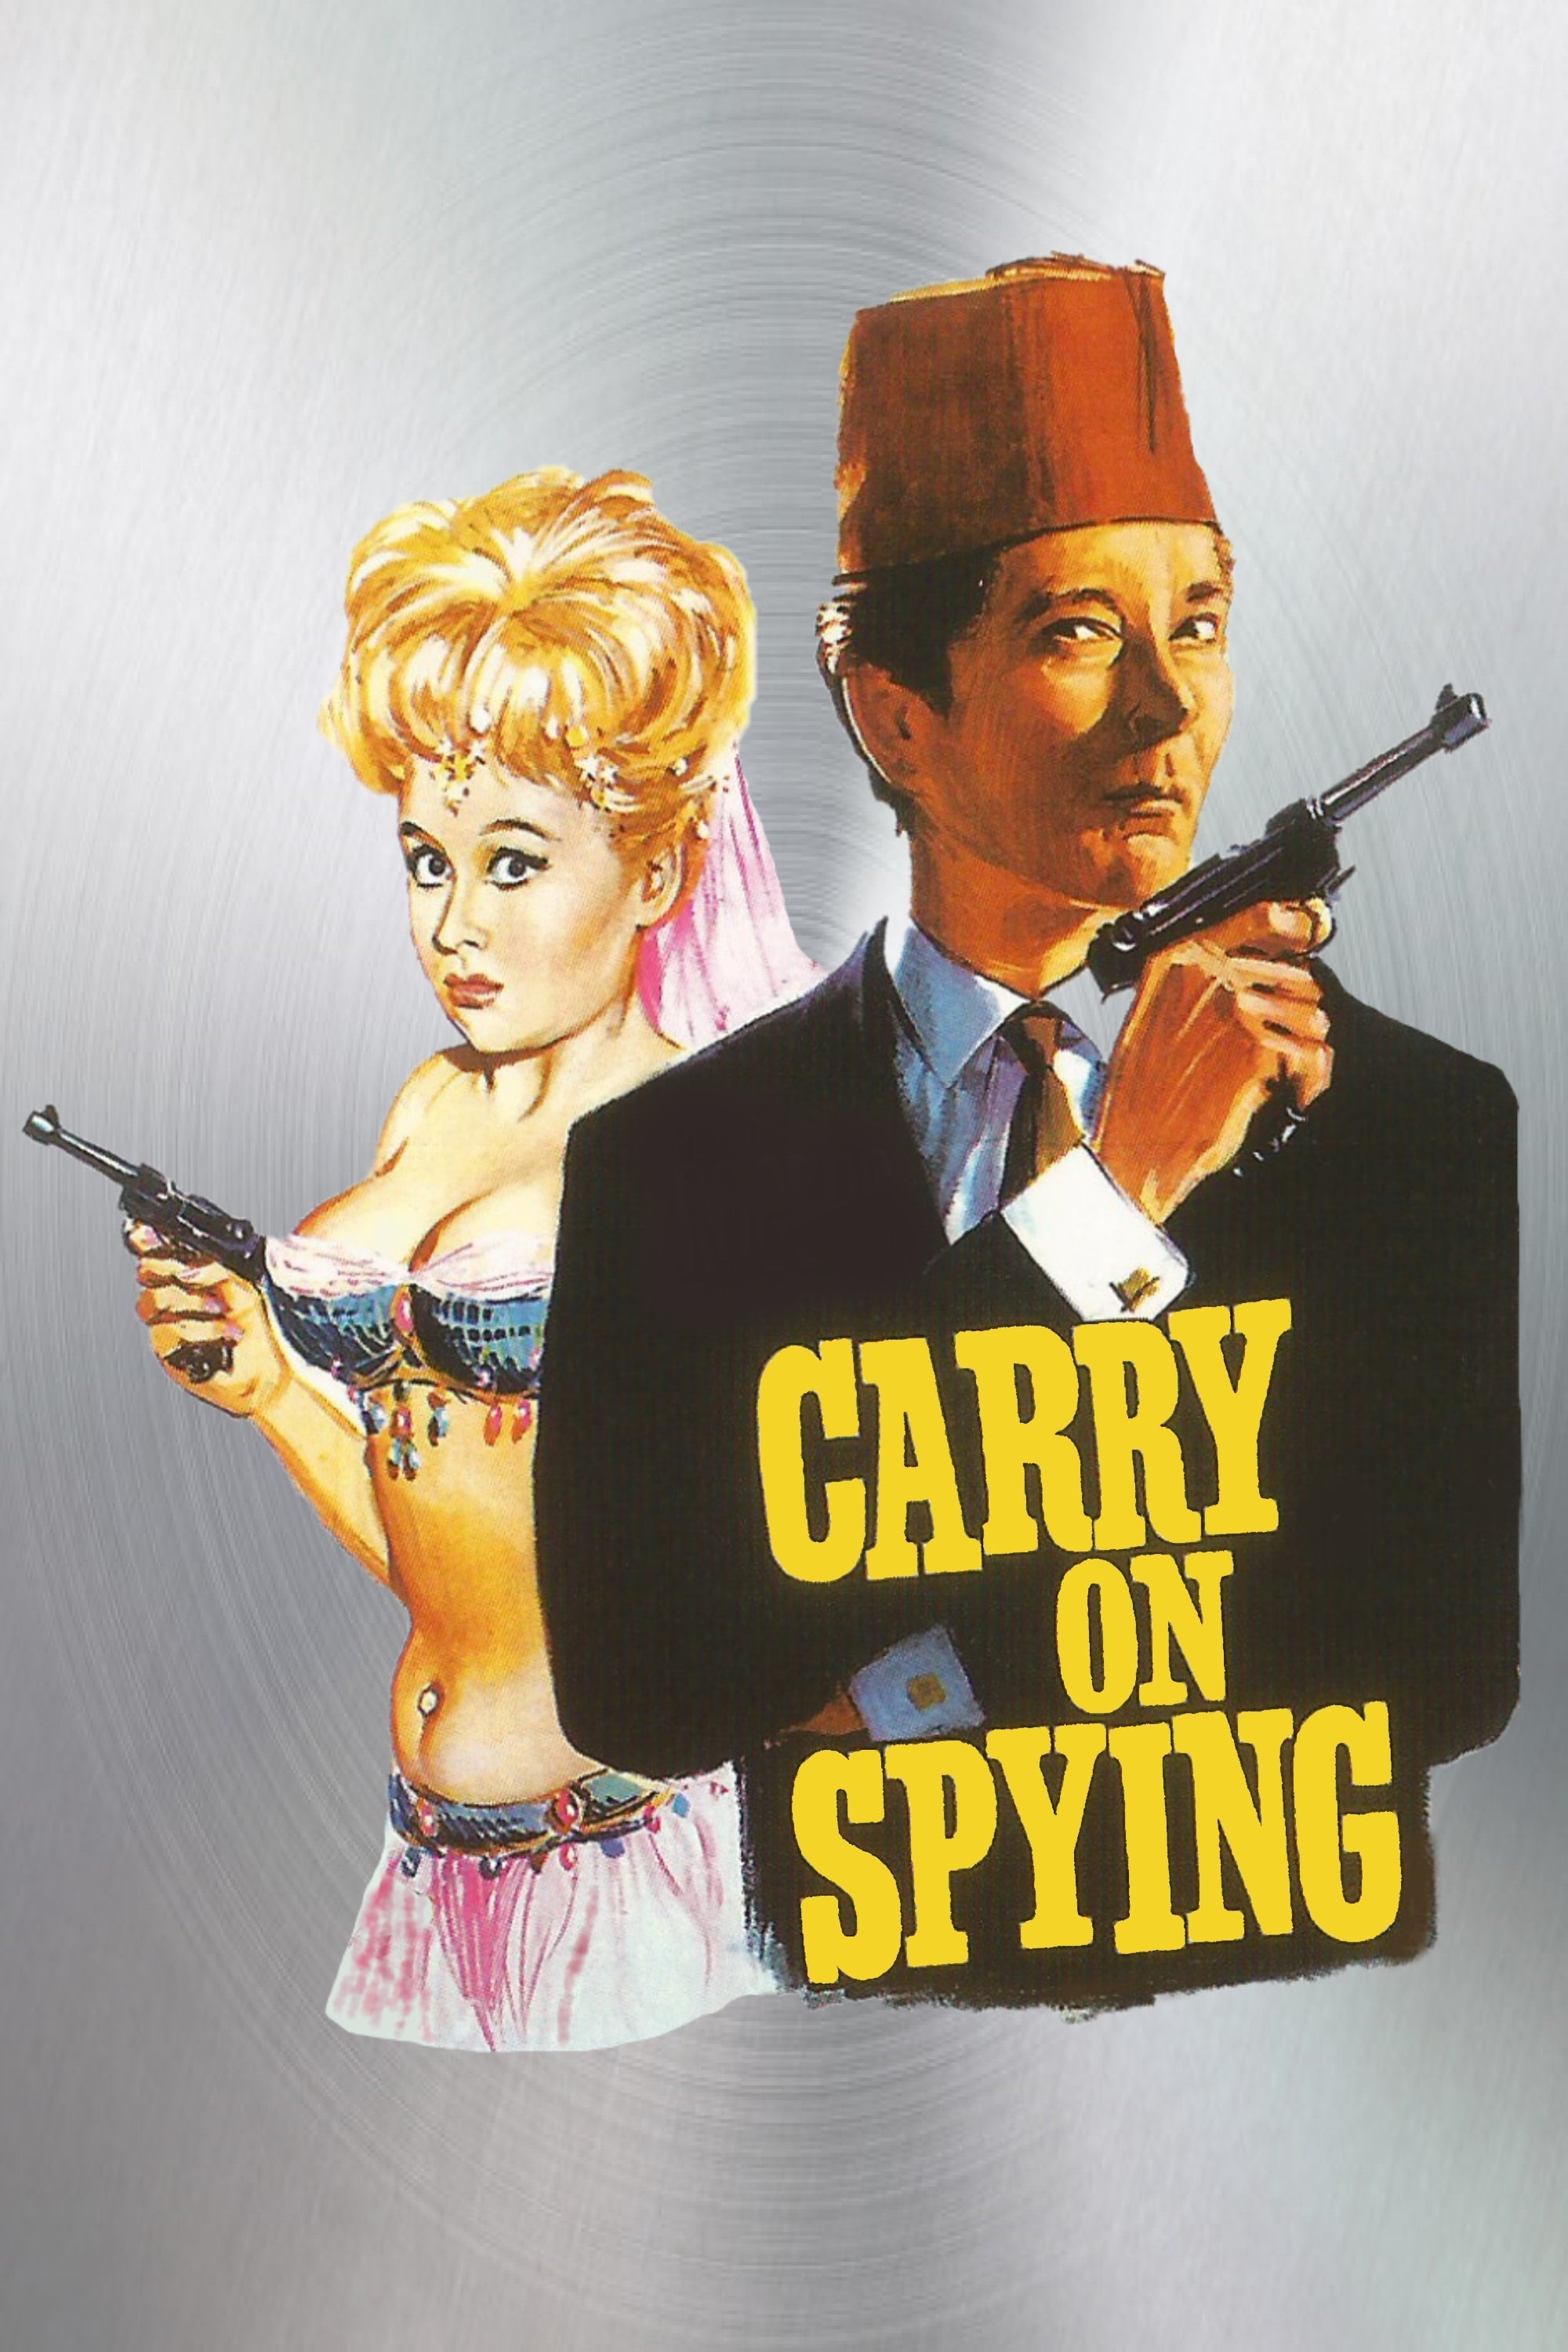 Carry On Spying (1964)